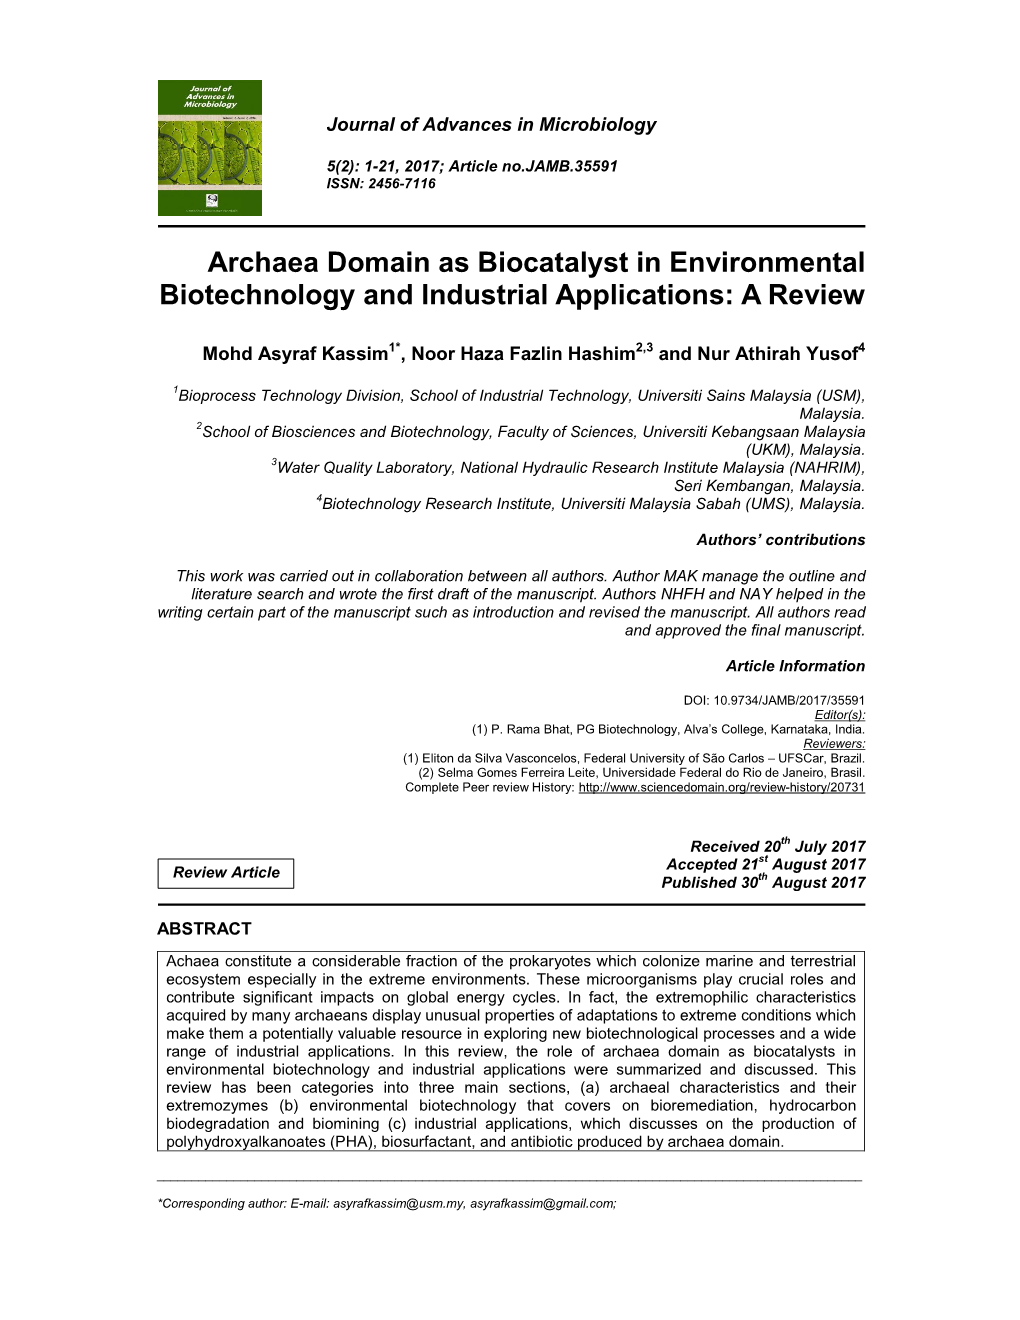 Archaea Domain As Biocatalyst in Environmental Biotechnology and Industrial Applications: a Review